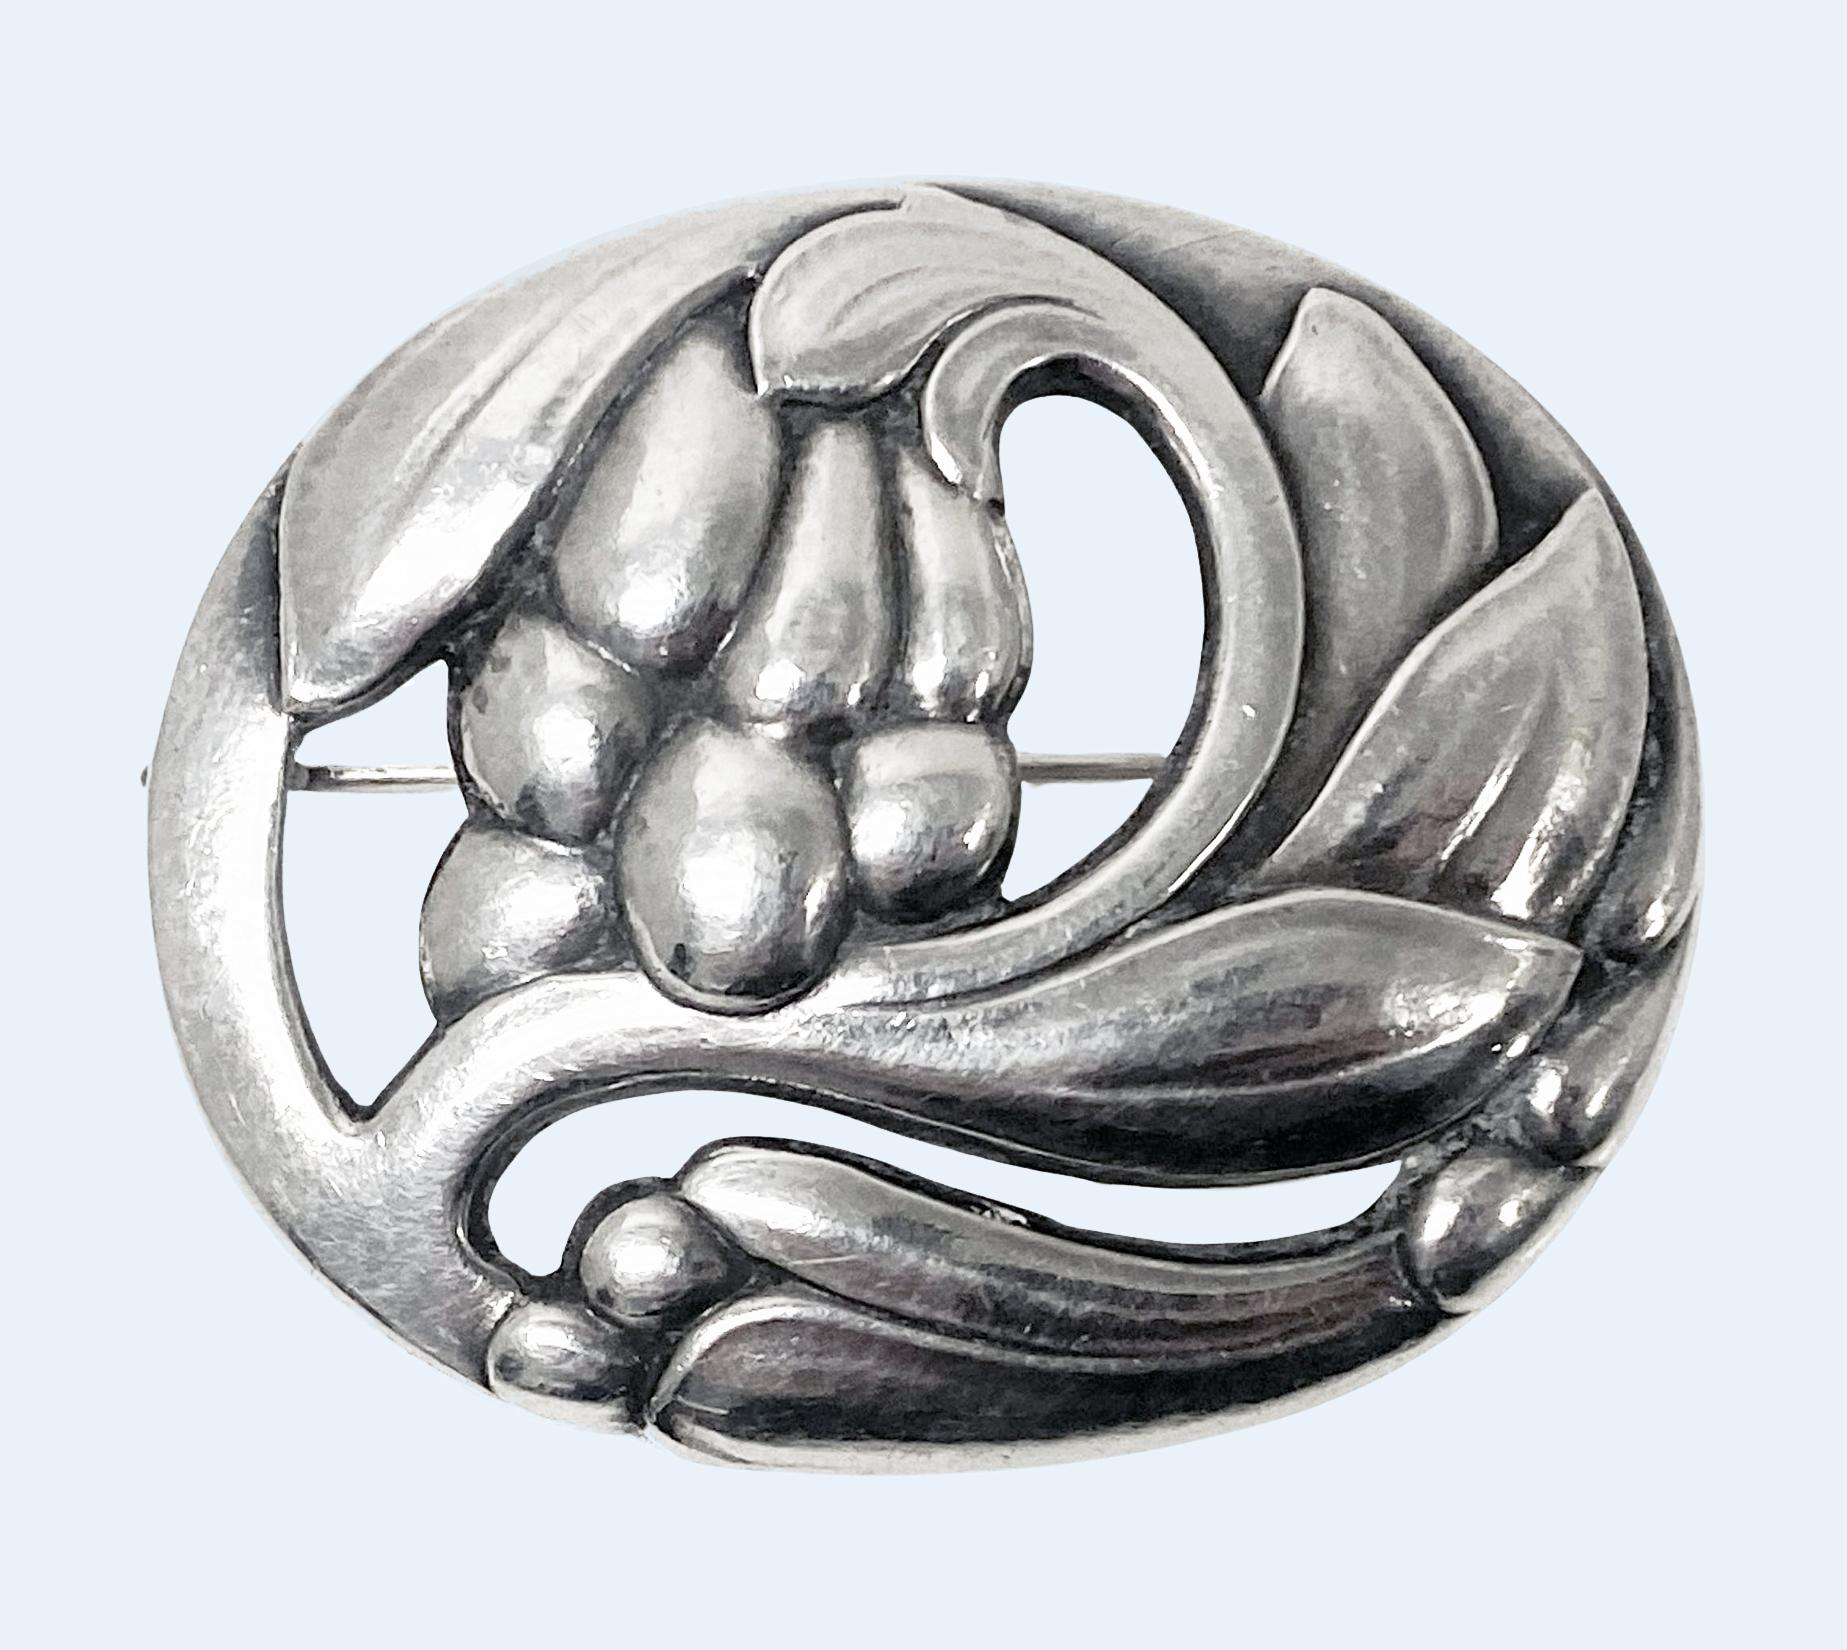 Georg Jensen Sterling Silver Blossom Pin C.1940 No 65. Stylised blossom floral pin brooch. Measures approximately 2.00 x 1.50 inches. Weight:15.80 grams. Full Georg Jensen Sterling Denmark GI in box and design Number 65 to reverse. Ref: P130 Georg